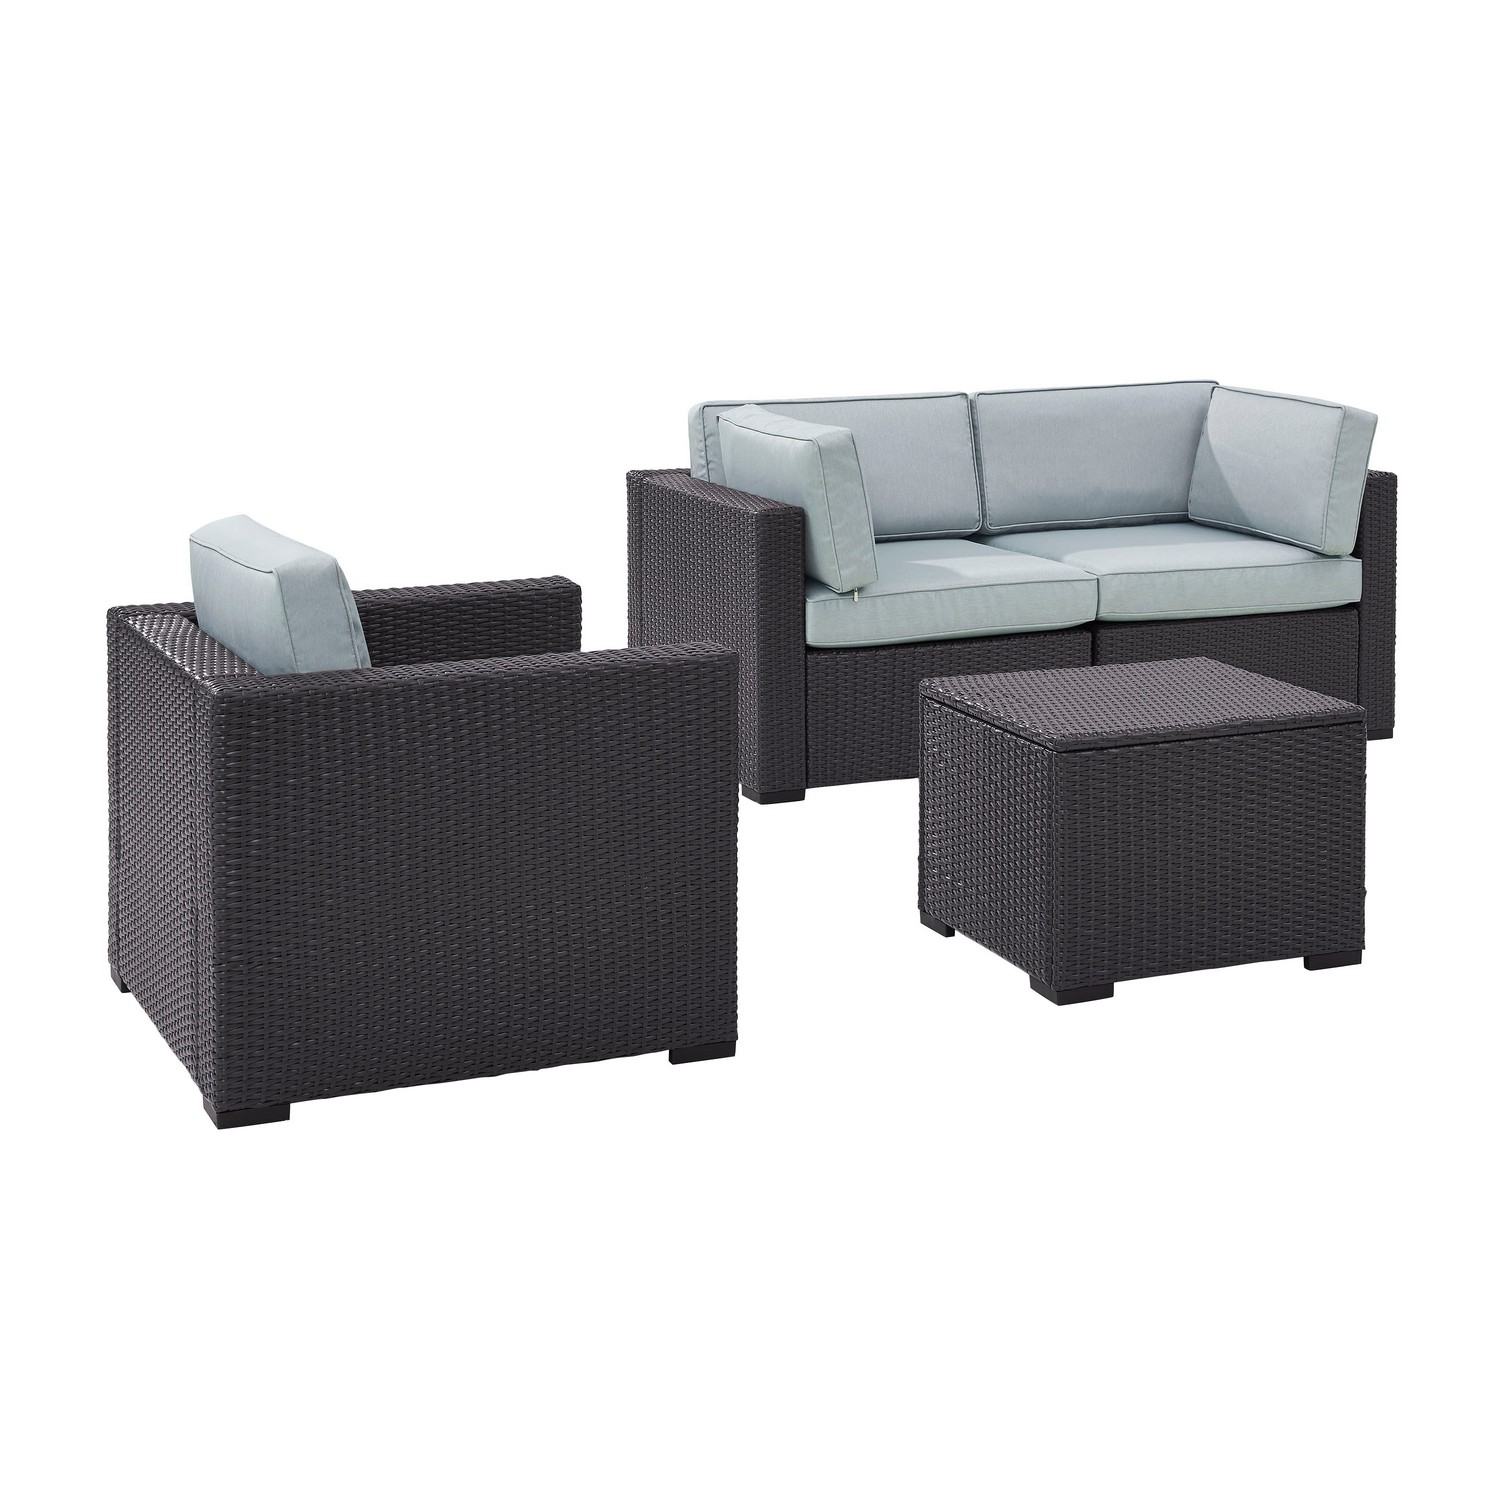 Crosley Biscayne 4-PC Outdoor Wicker Sectional Set - 2 Corner Chairs, Arm Chair, Coffee Table - Mist/Brown